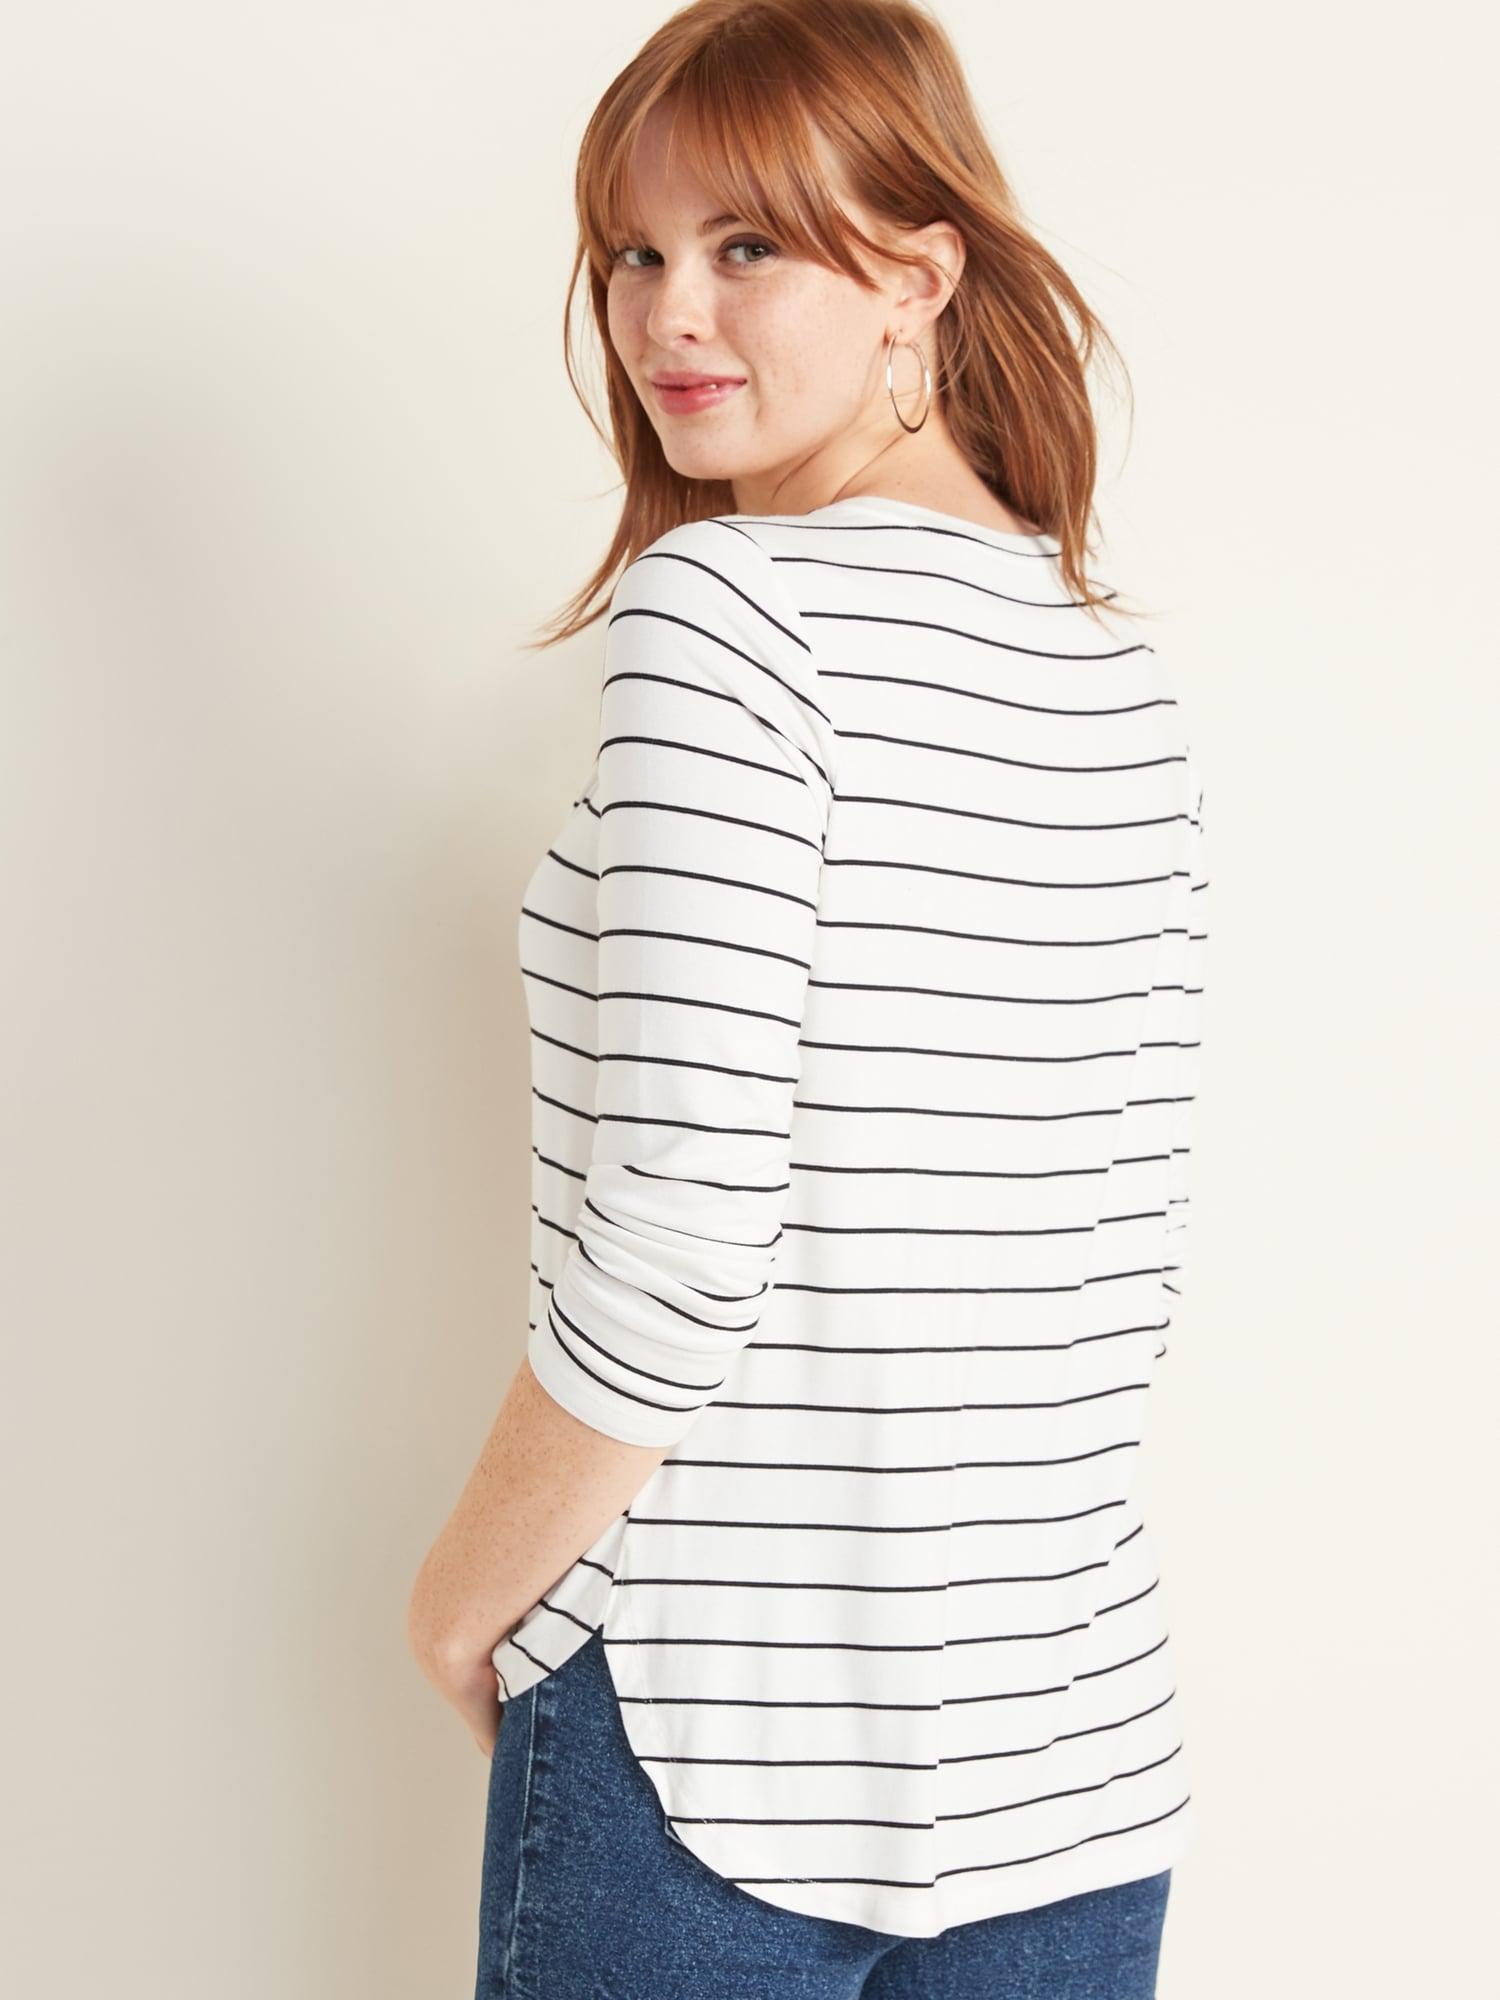 old navy black and white striped shirt